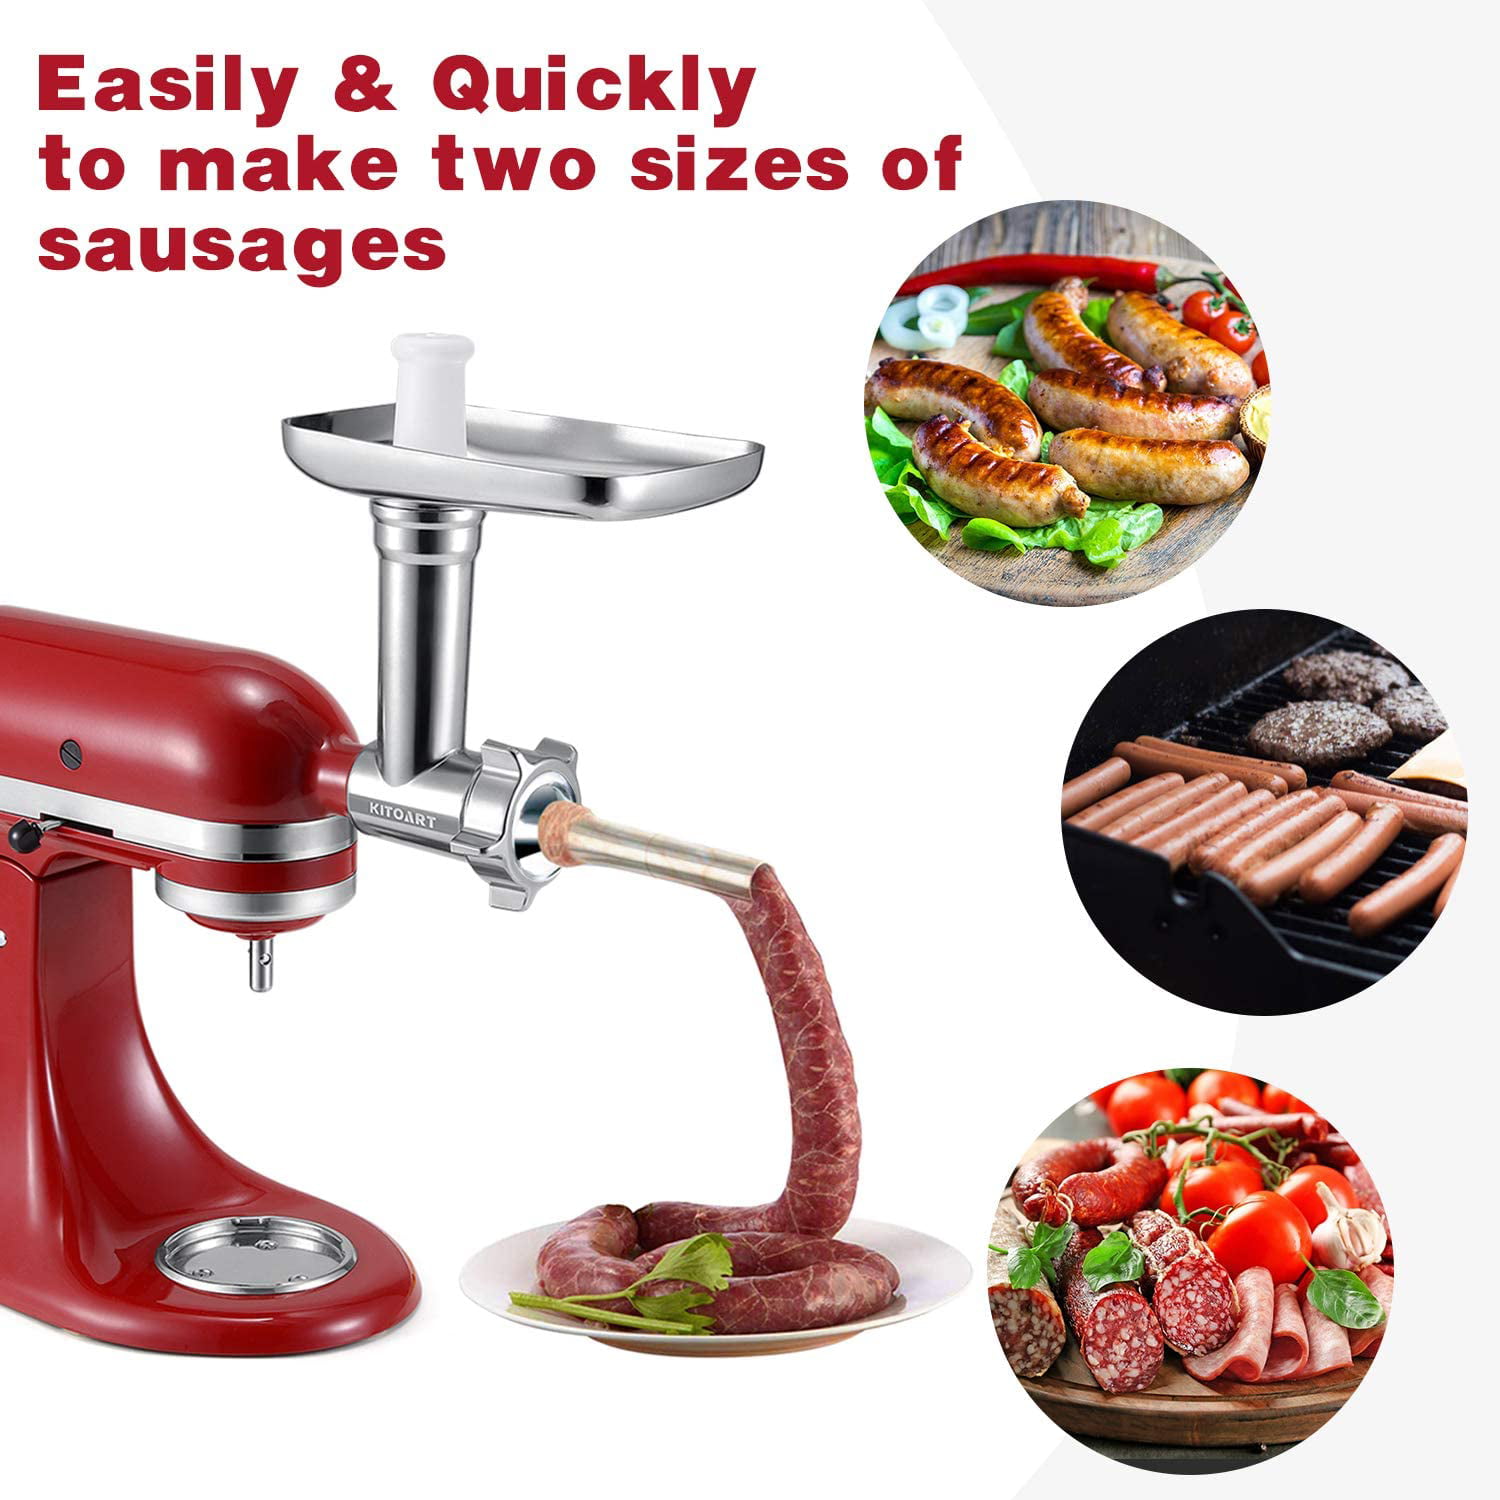 Meat Grinder&Slicer Shredder Attachment for KitchenAid Stand Mixer, For  KitchenAid Mixer Accessories Includes Metal Meat Grinder with Sausage  Stuffer